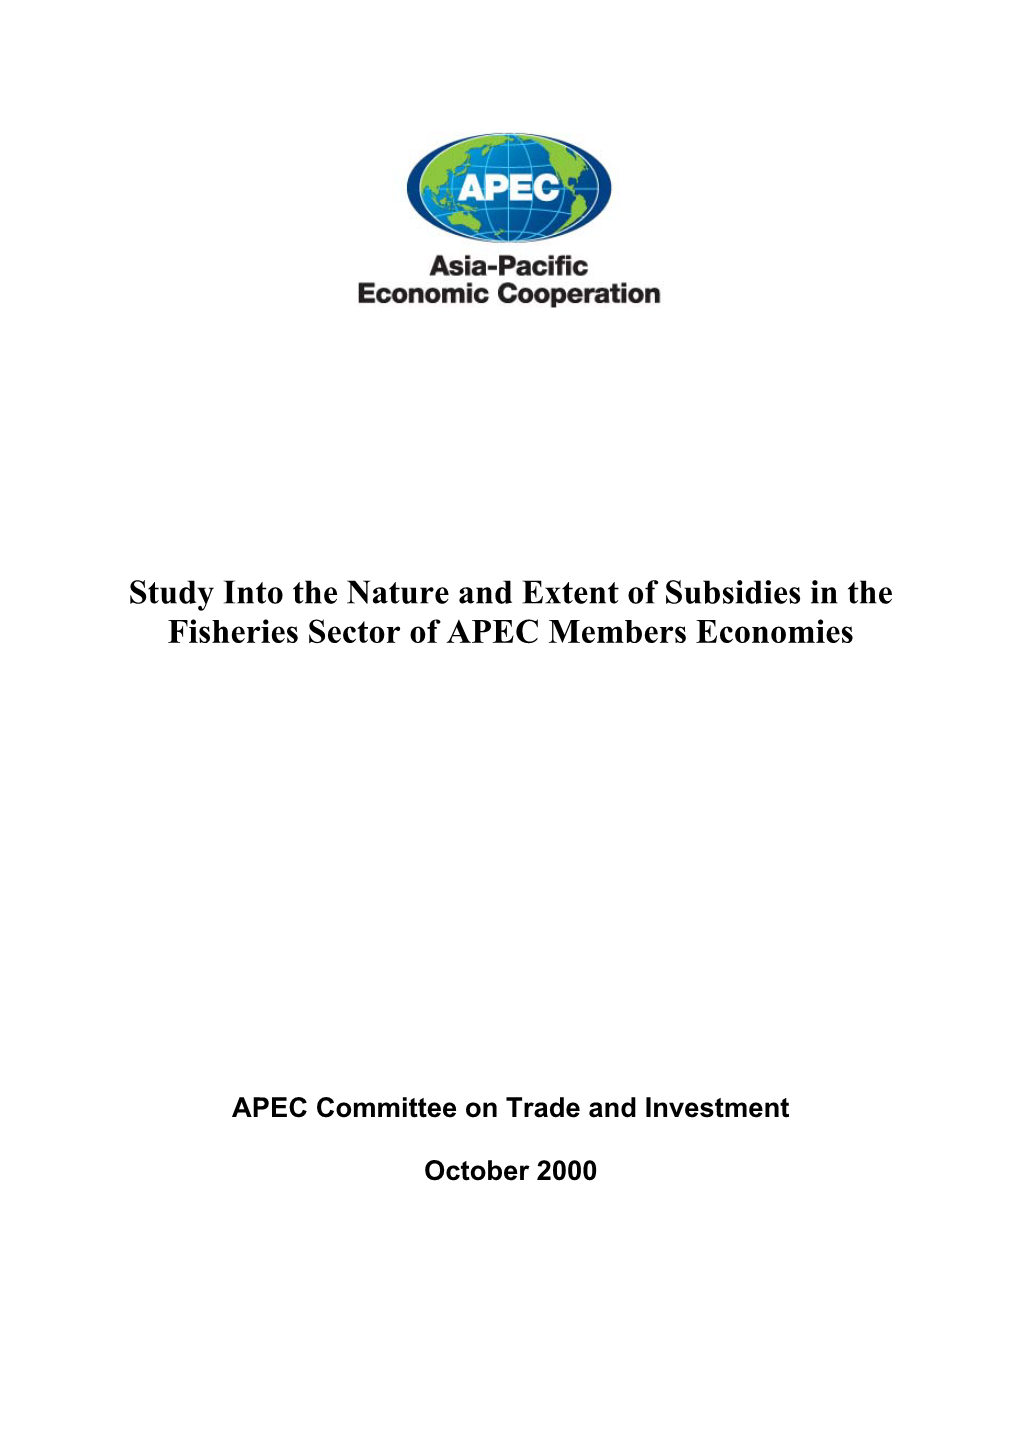 Study Into the Nature and Extent of Subsidies in the Fisheries Sector of APEC Members Economies